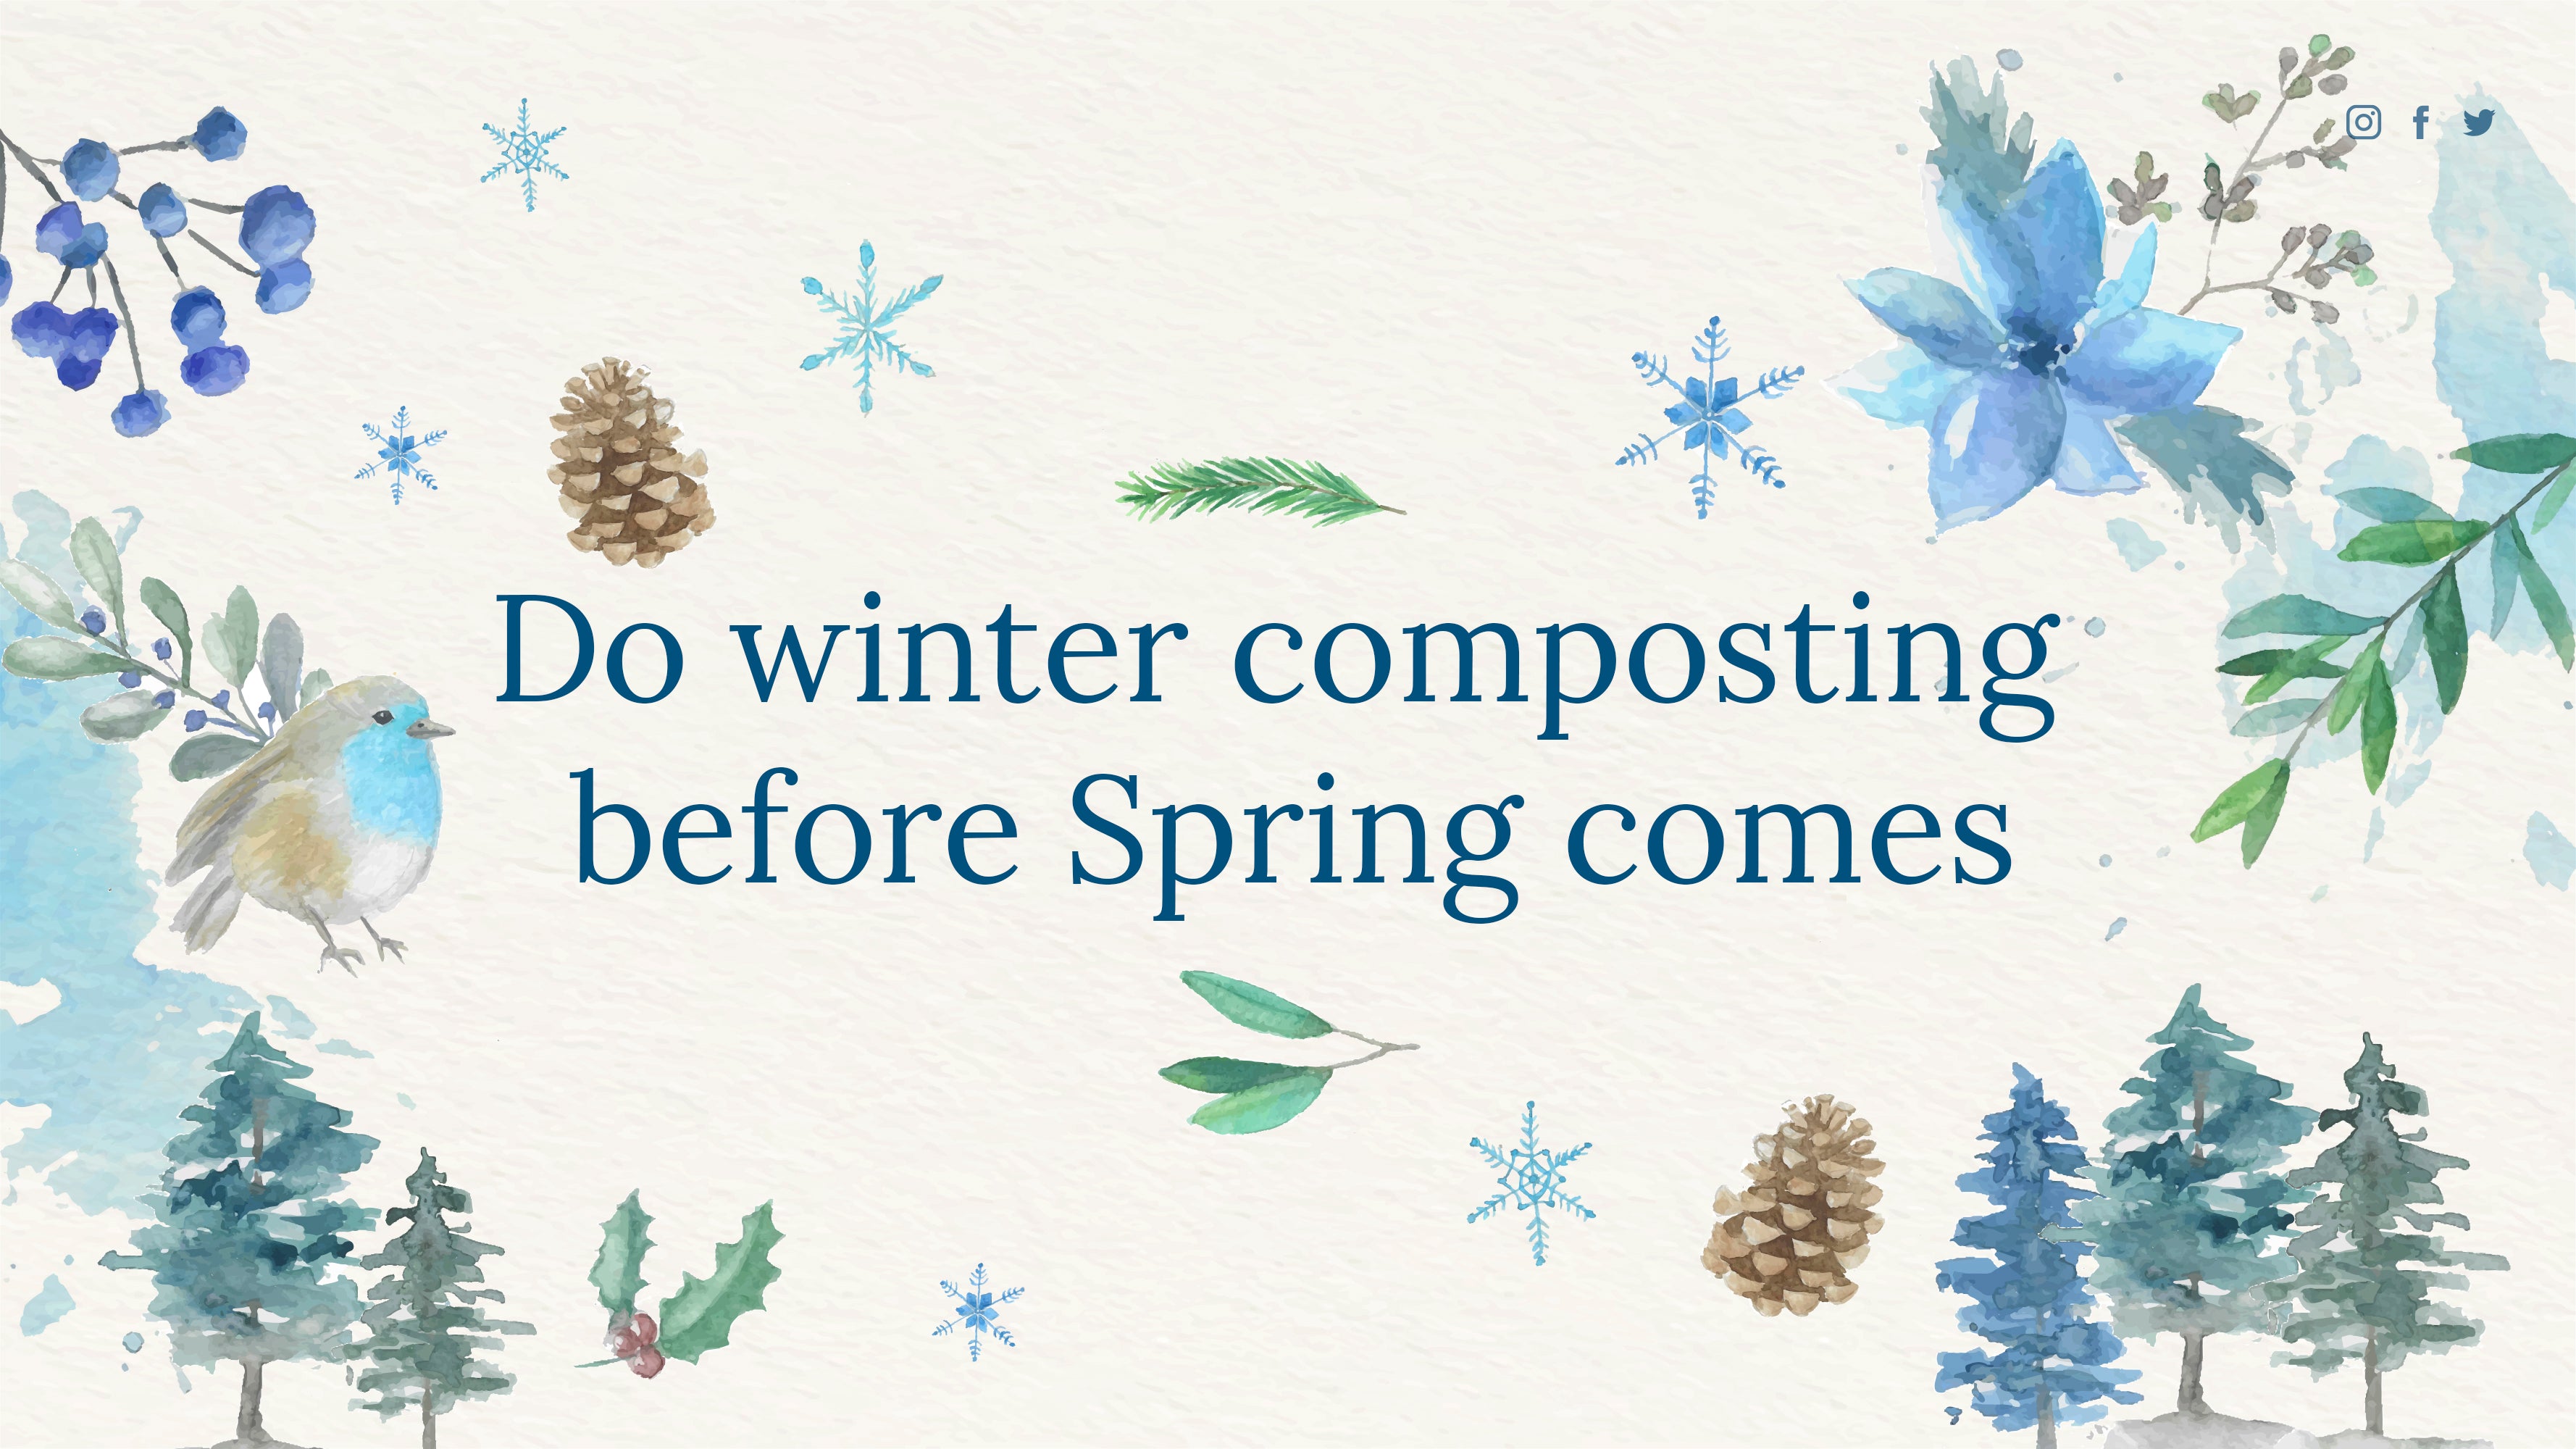 Why winter composting is important?